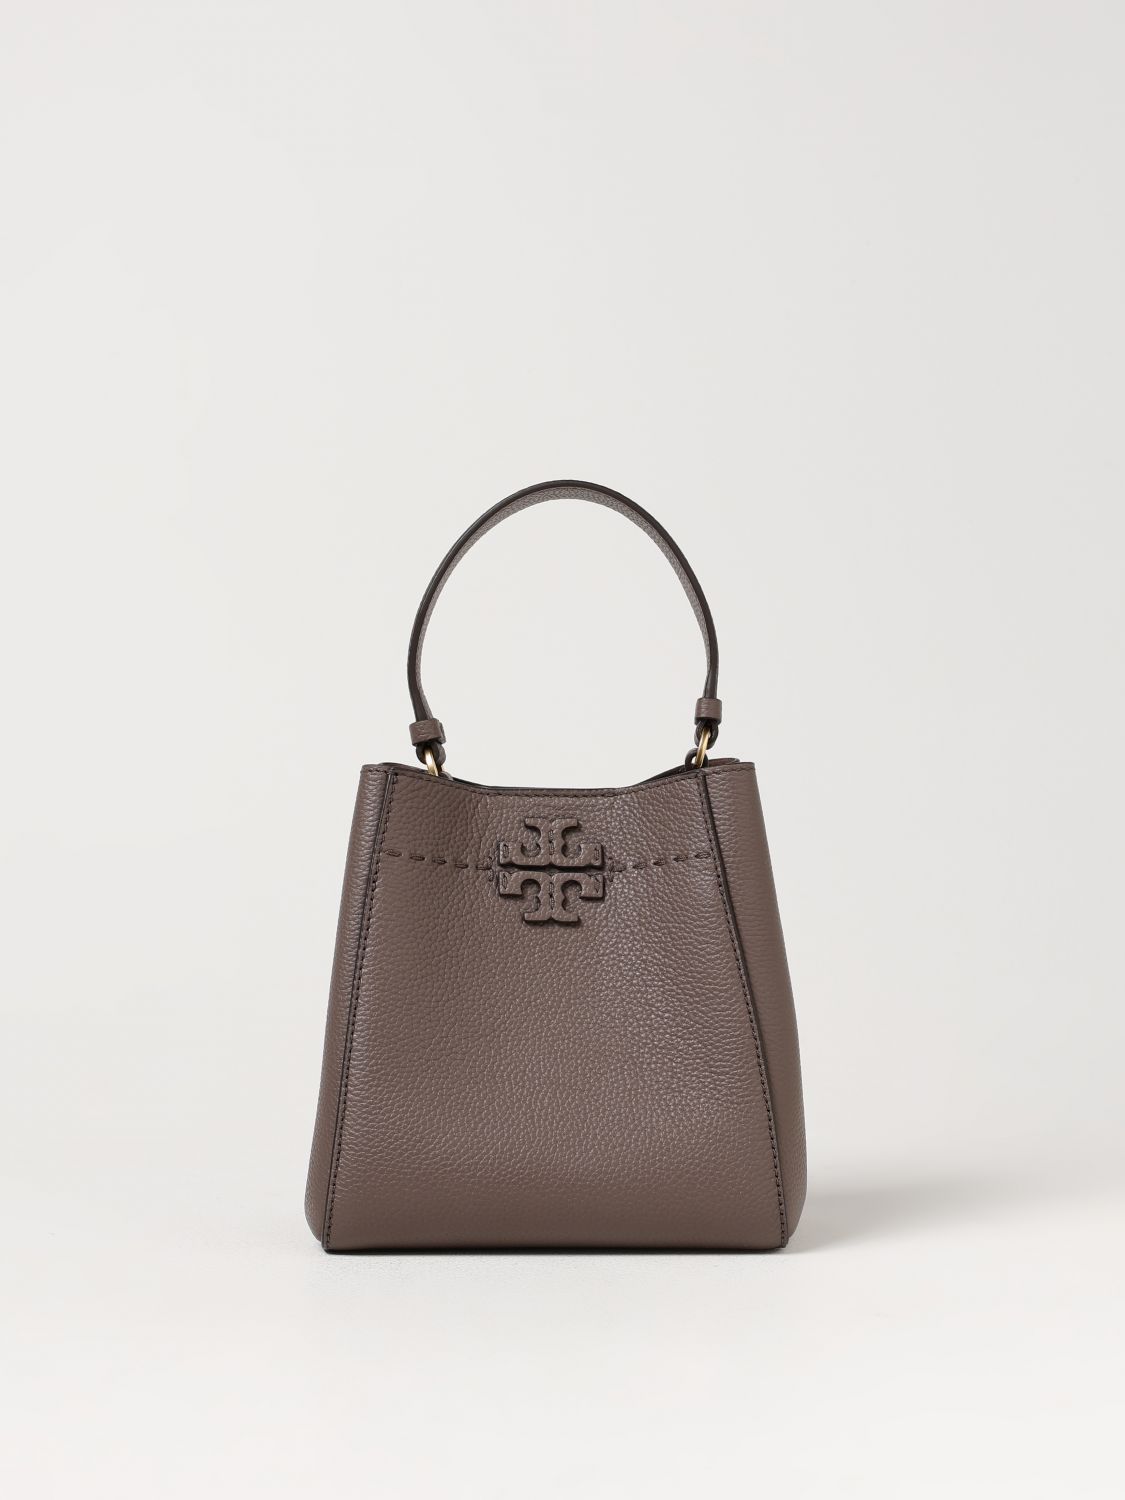 Tory Burch Tory Burch McGraw bag in grained leather